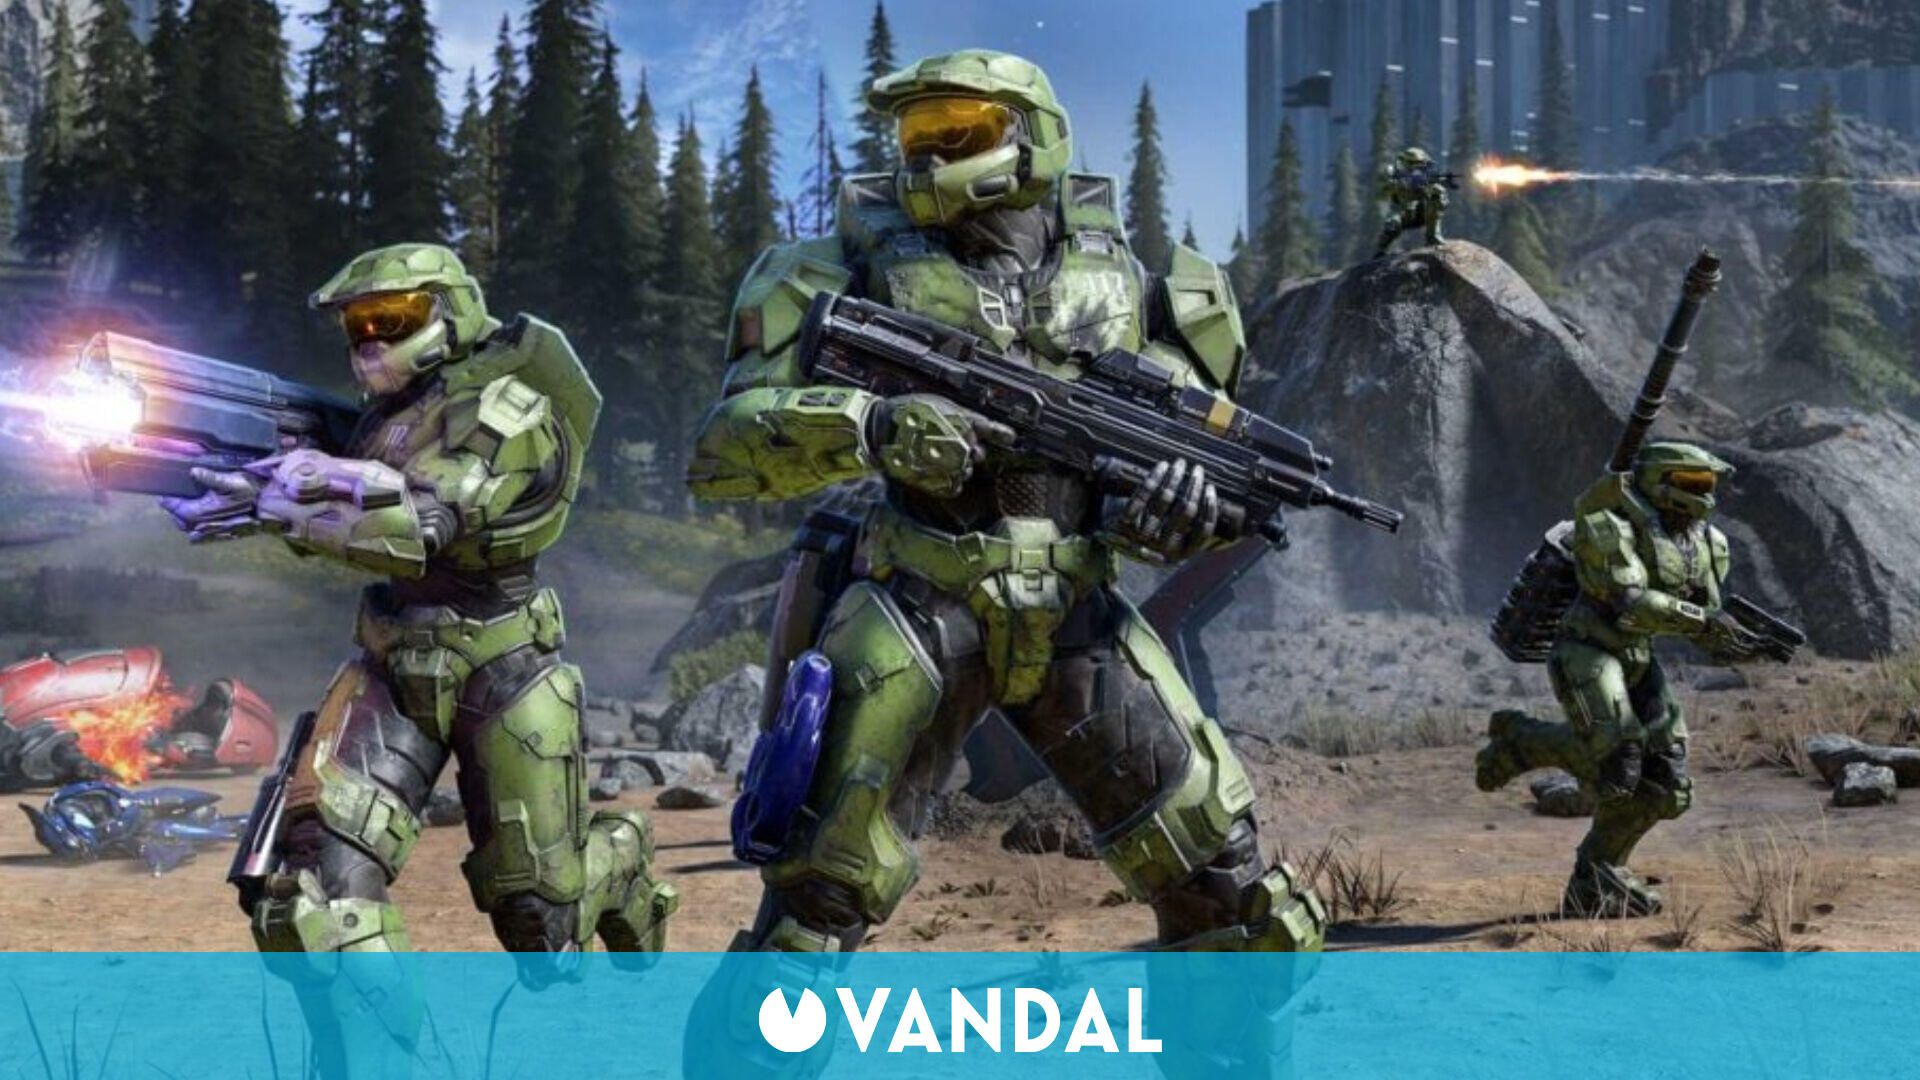 Halo will still be responsible for the 343i, but other studios can work on new games